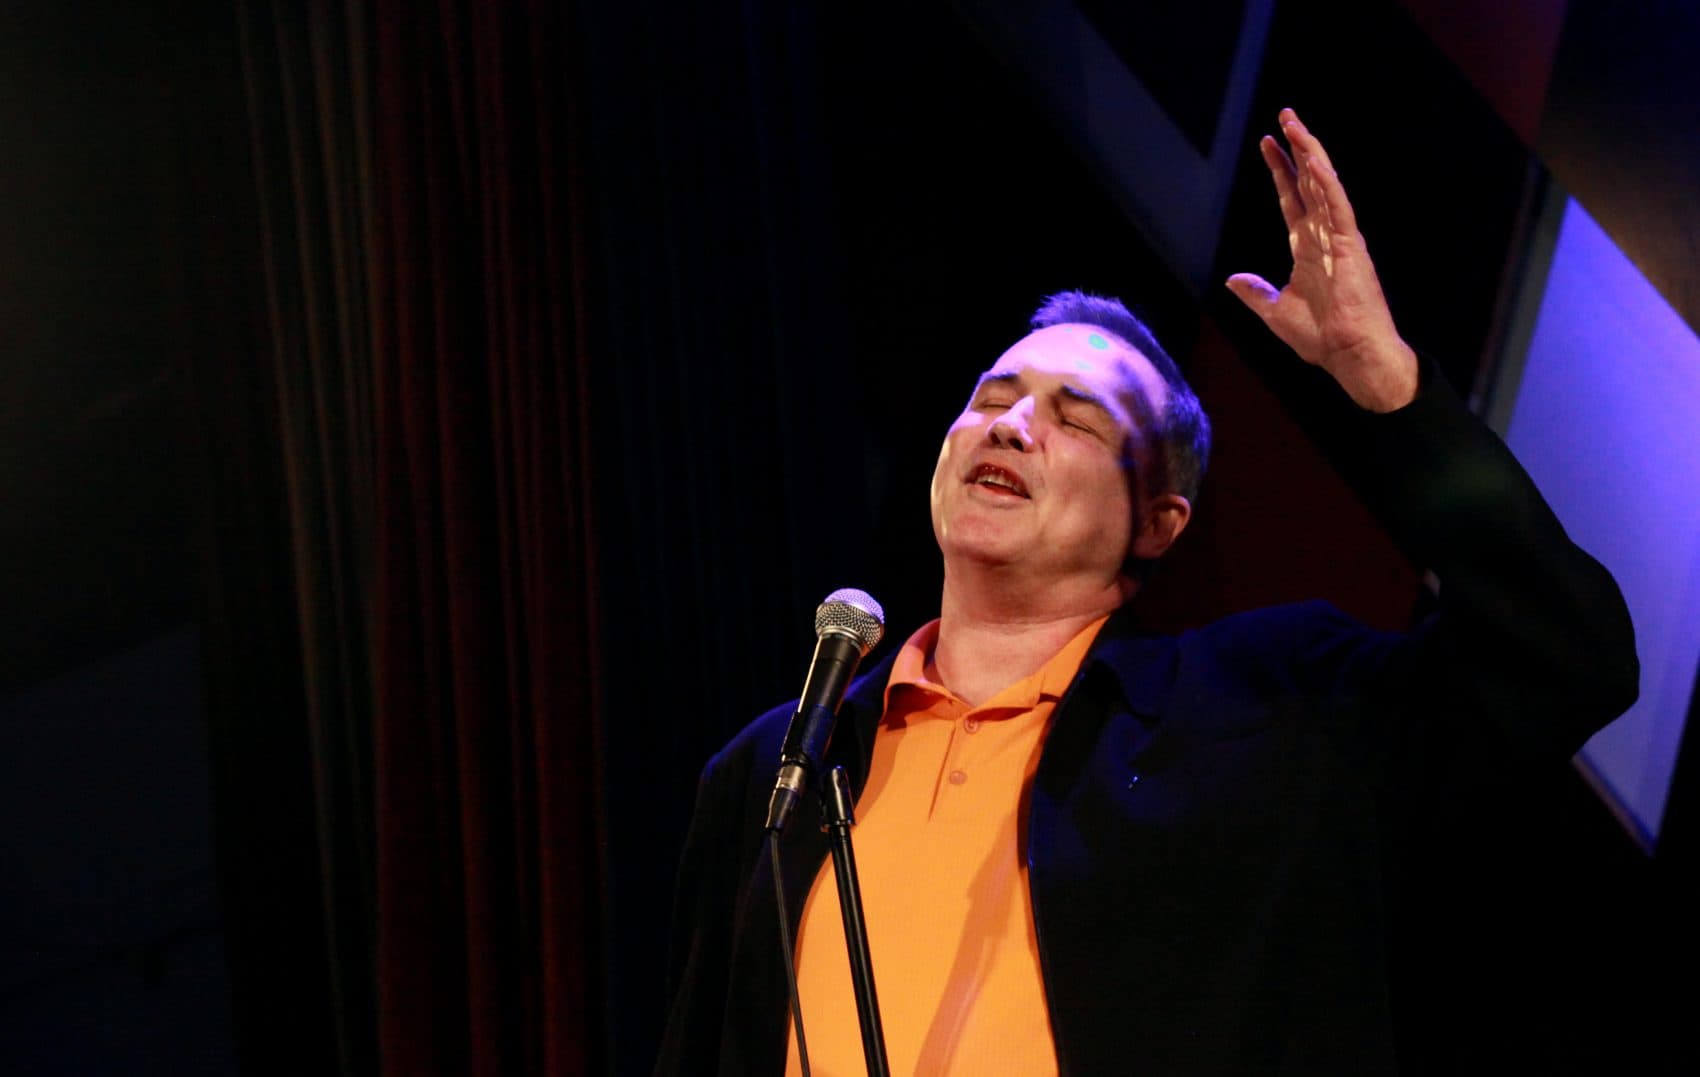 Comedian Norm MacDonald performs on stage at Carolines on Broadway in Manhattan, NY, on November 13, 2015. (Photo by Yana Paskova/For The Washington Post)